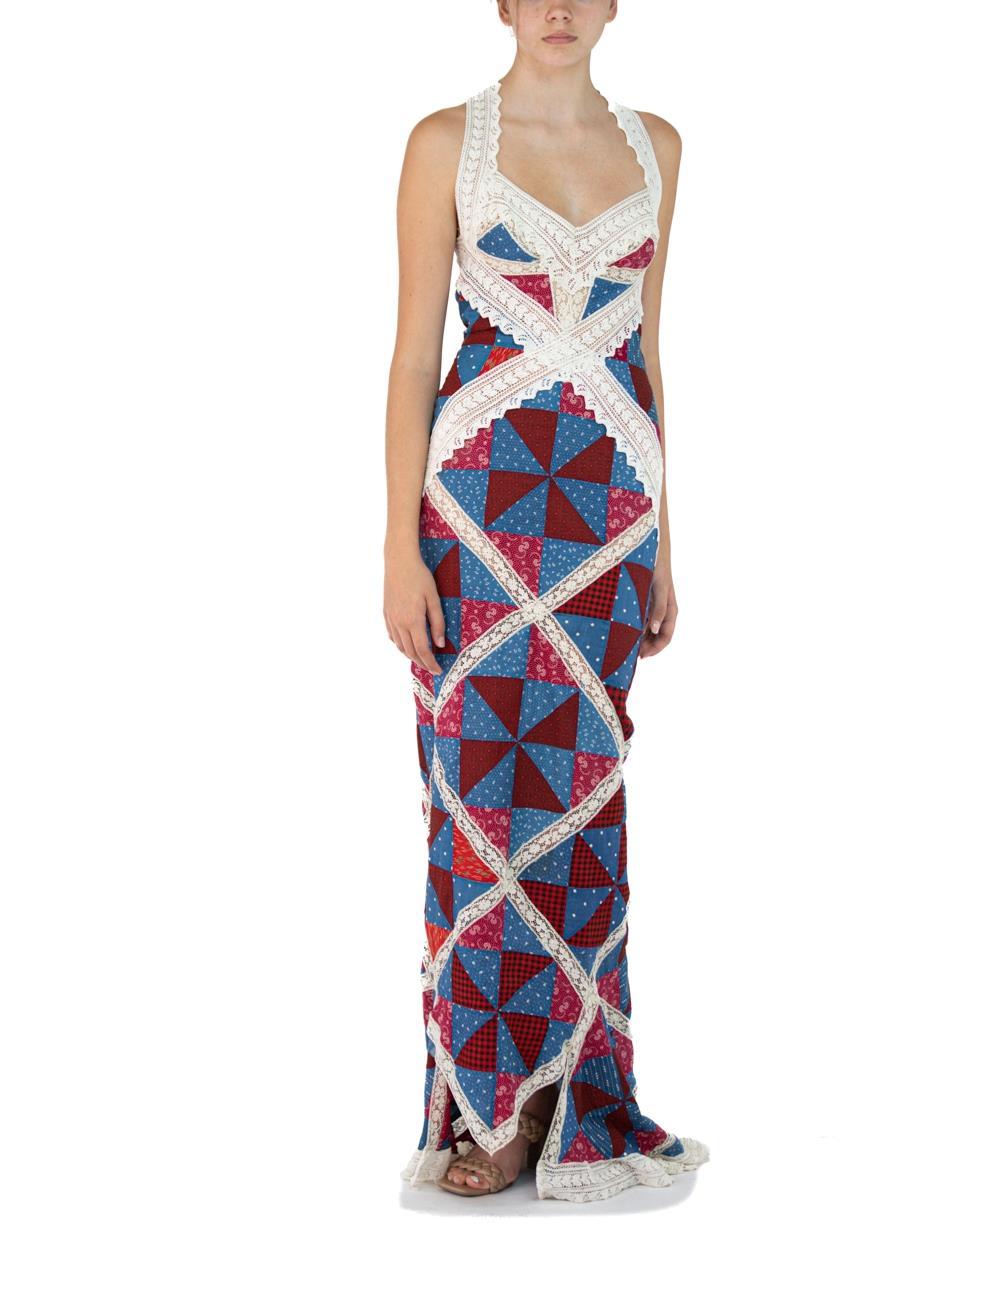 Morphew Atelier Red, White & Blue Cotton Blend Victorian Lace Patchwork Gown For Sale 2